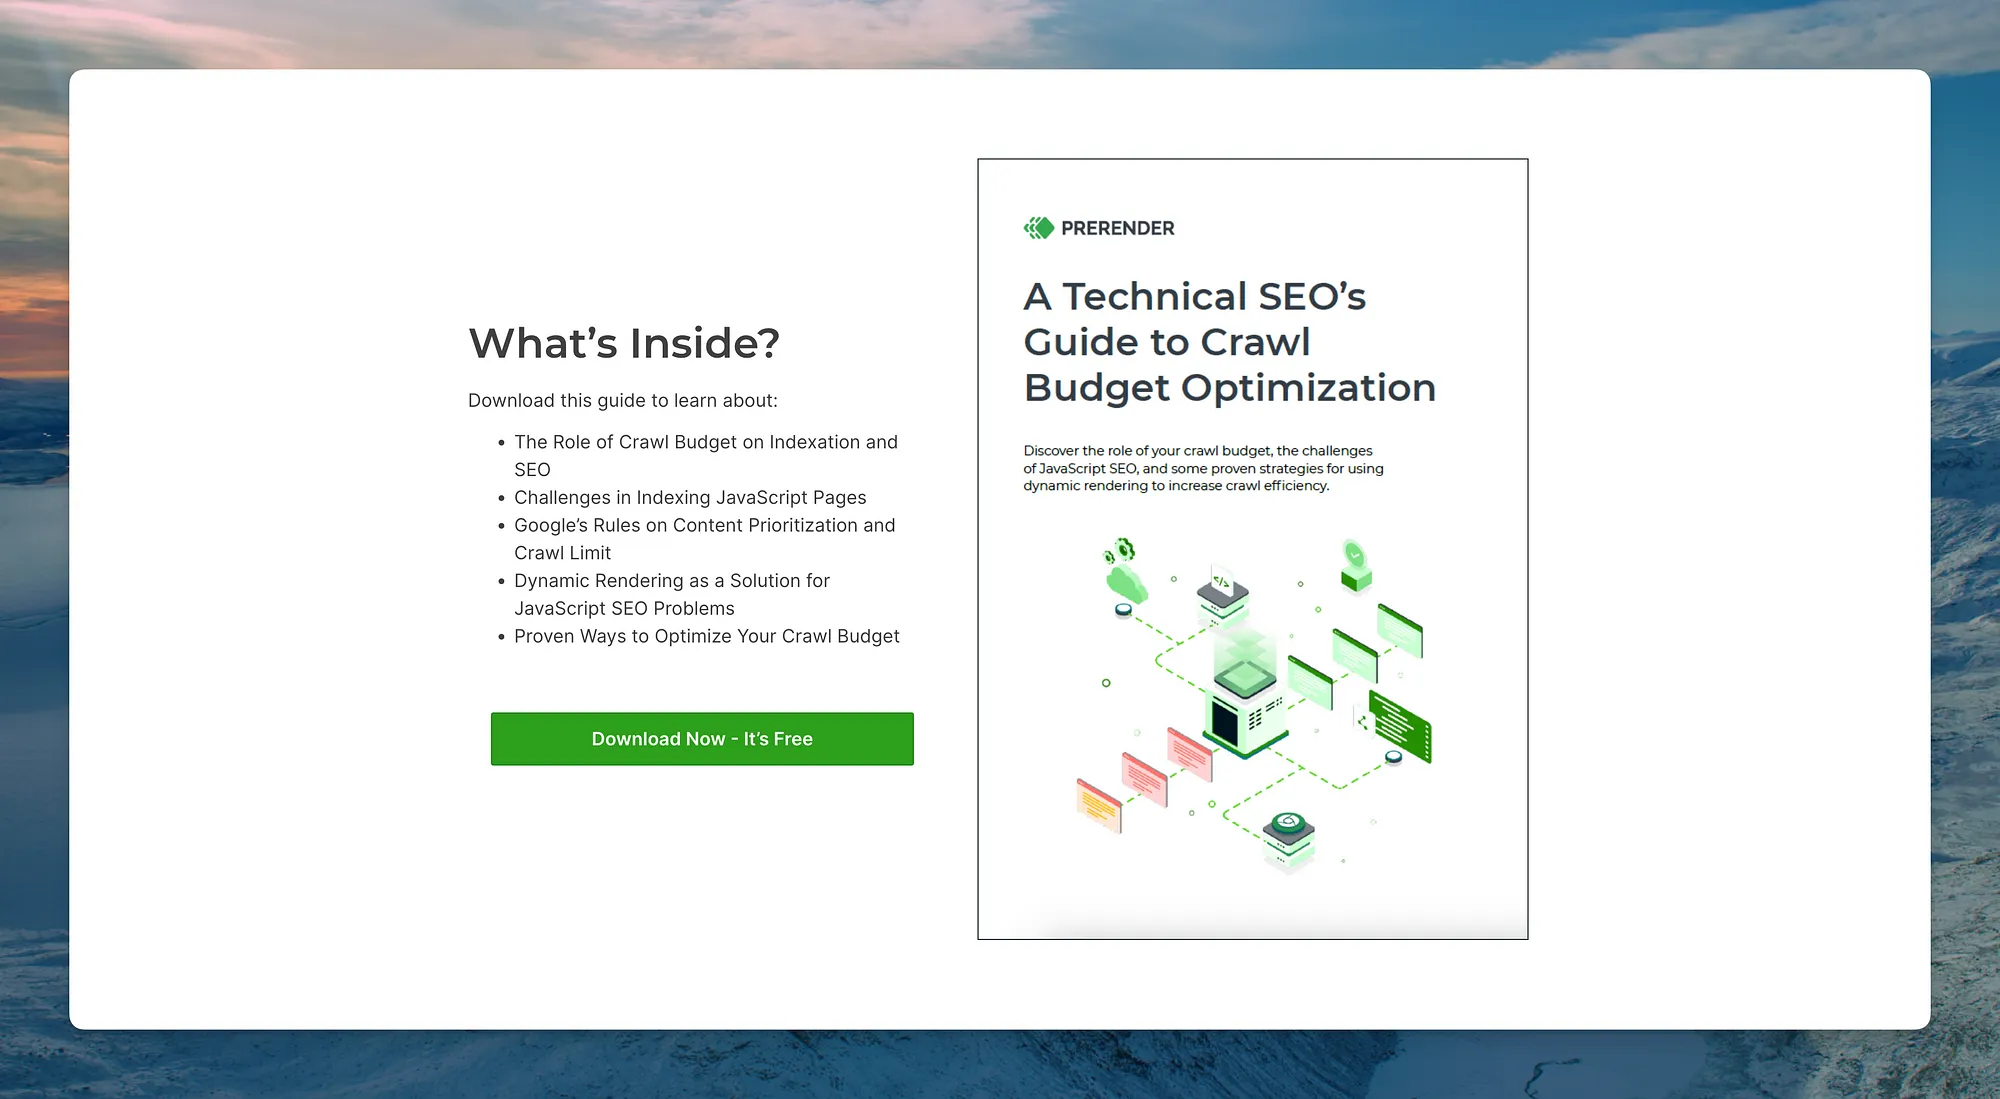 A Technical SEO’s Guide to Crawl Budget Optimization